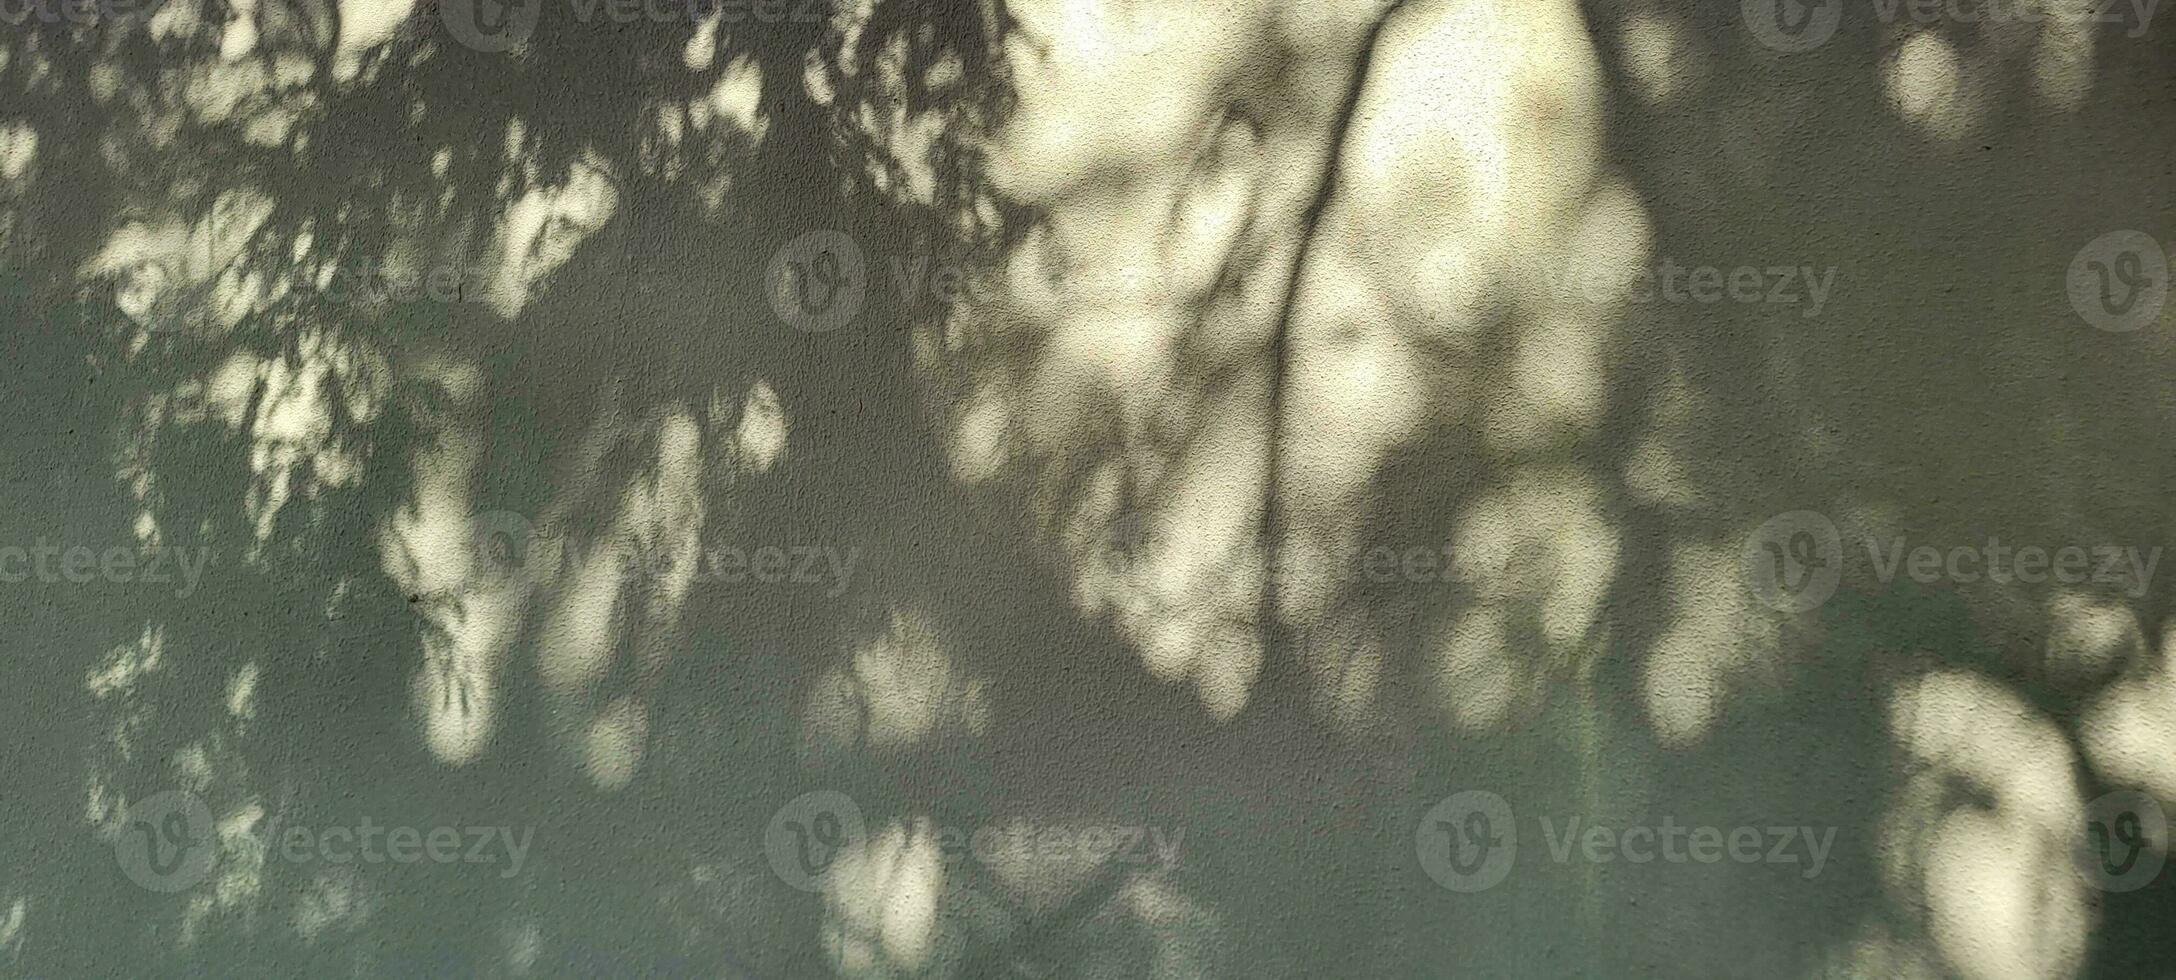 Subtle silhouettes of leaves dance in soft shadows against a white background, a natural elegance in every stroke. Achieve visual serenity with this unique background. photo